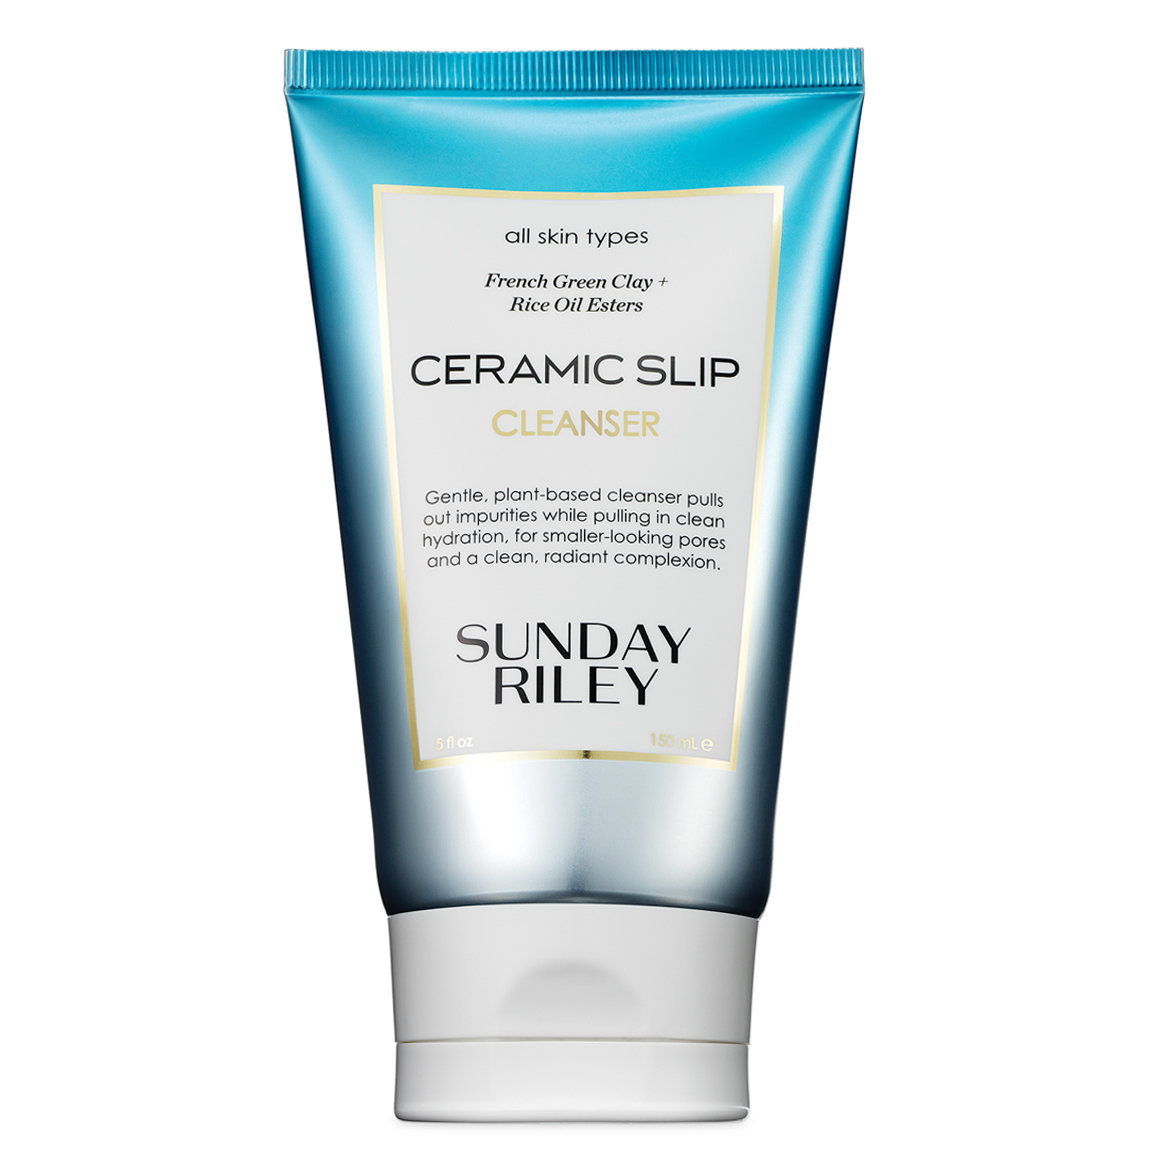 Sunday Riley Ceramic Slip Clay Cleanser alternative view 1 - product swatch.